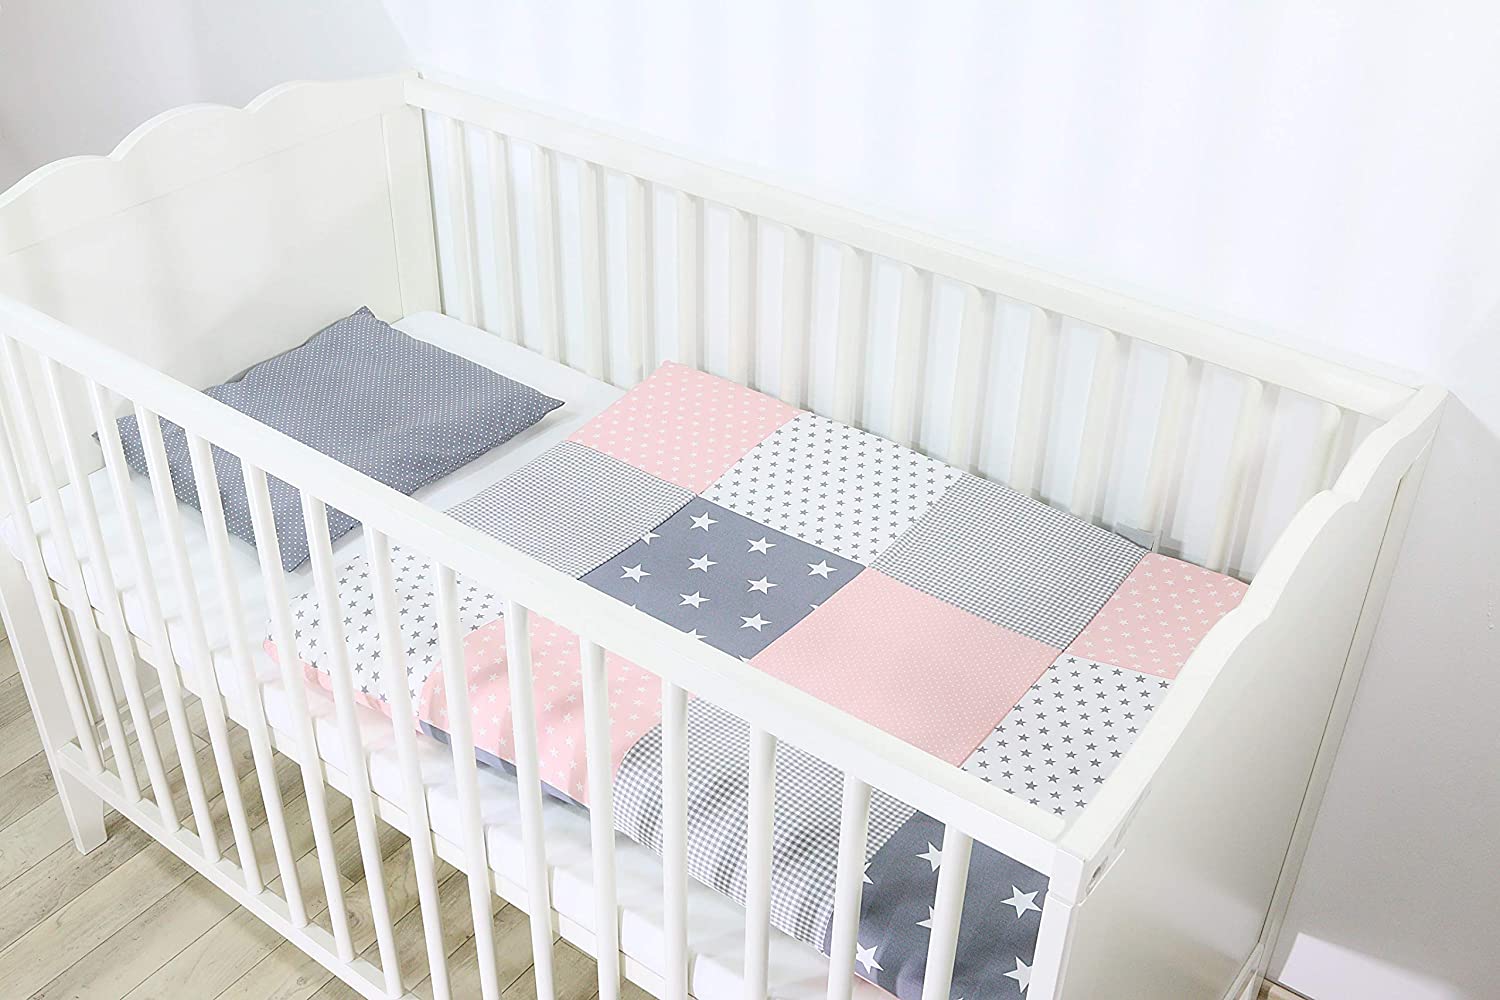 Ullenboom ® Baby Bedding Set - 2 Pieces (Complete): Baby bed linen 80 x 80 cm and pillowcase 35 x 40 cm, baby bed set for the baby bed made from 100% cotton. Pink Grey